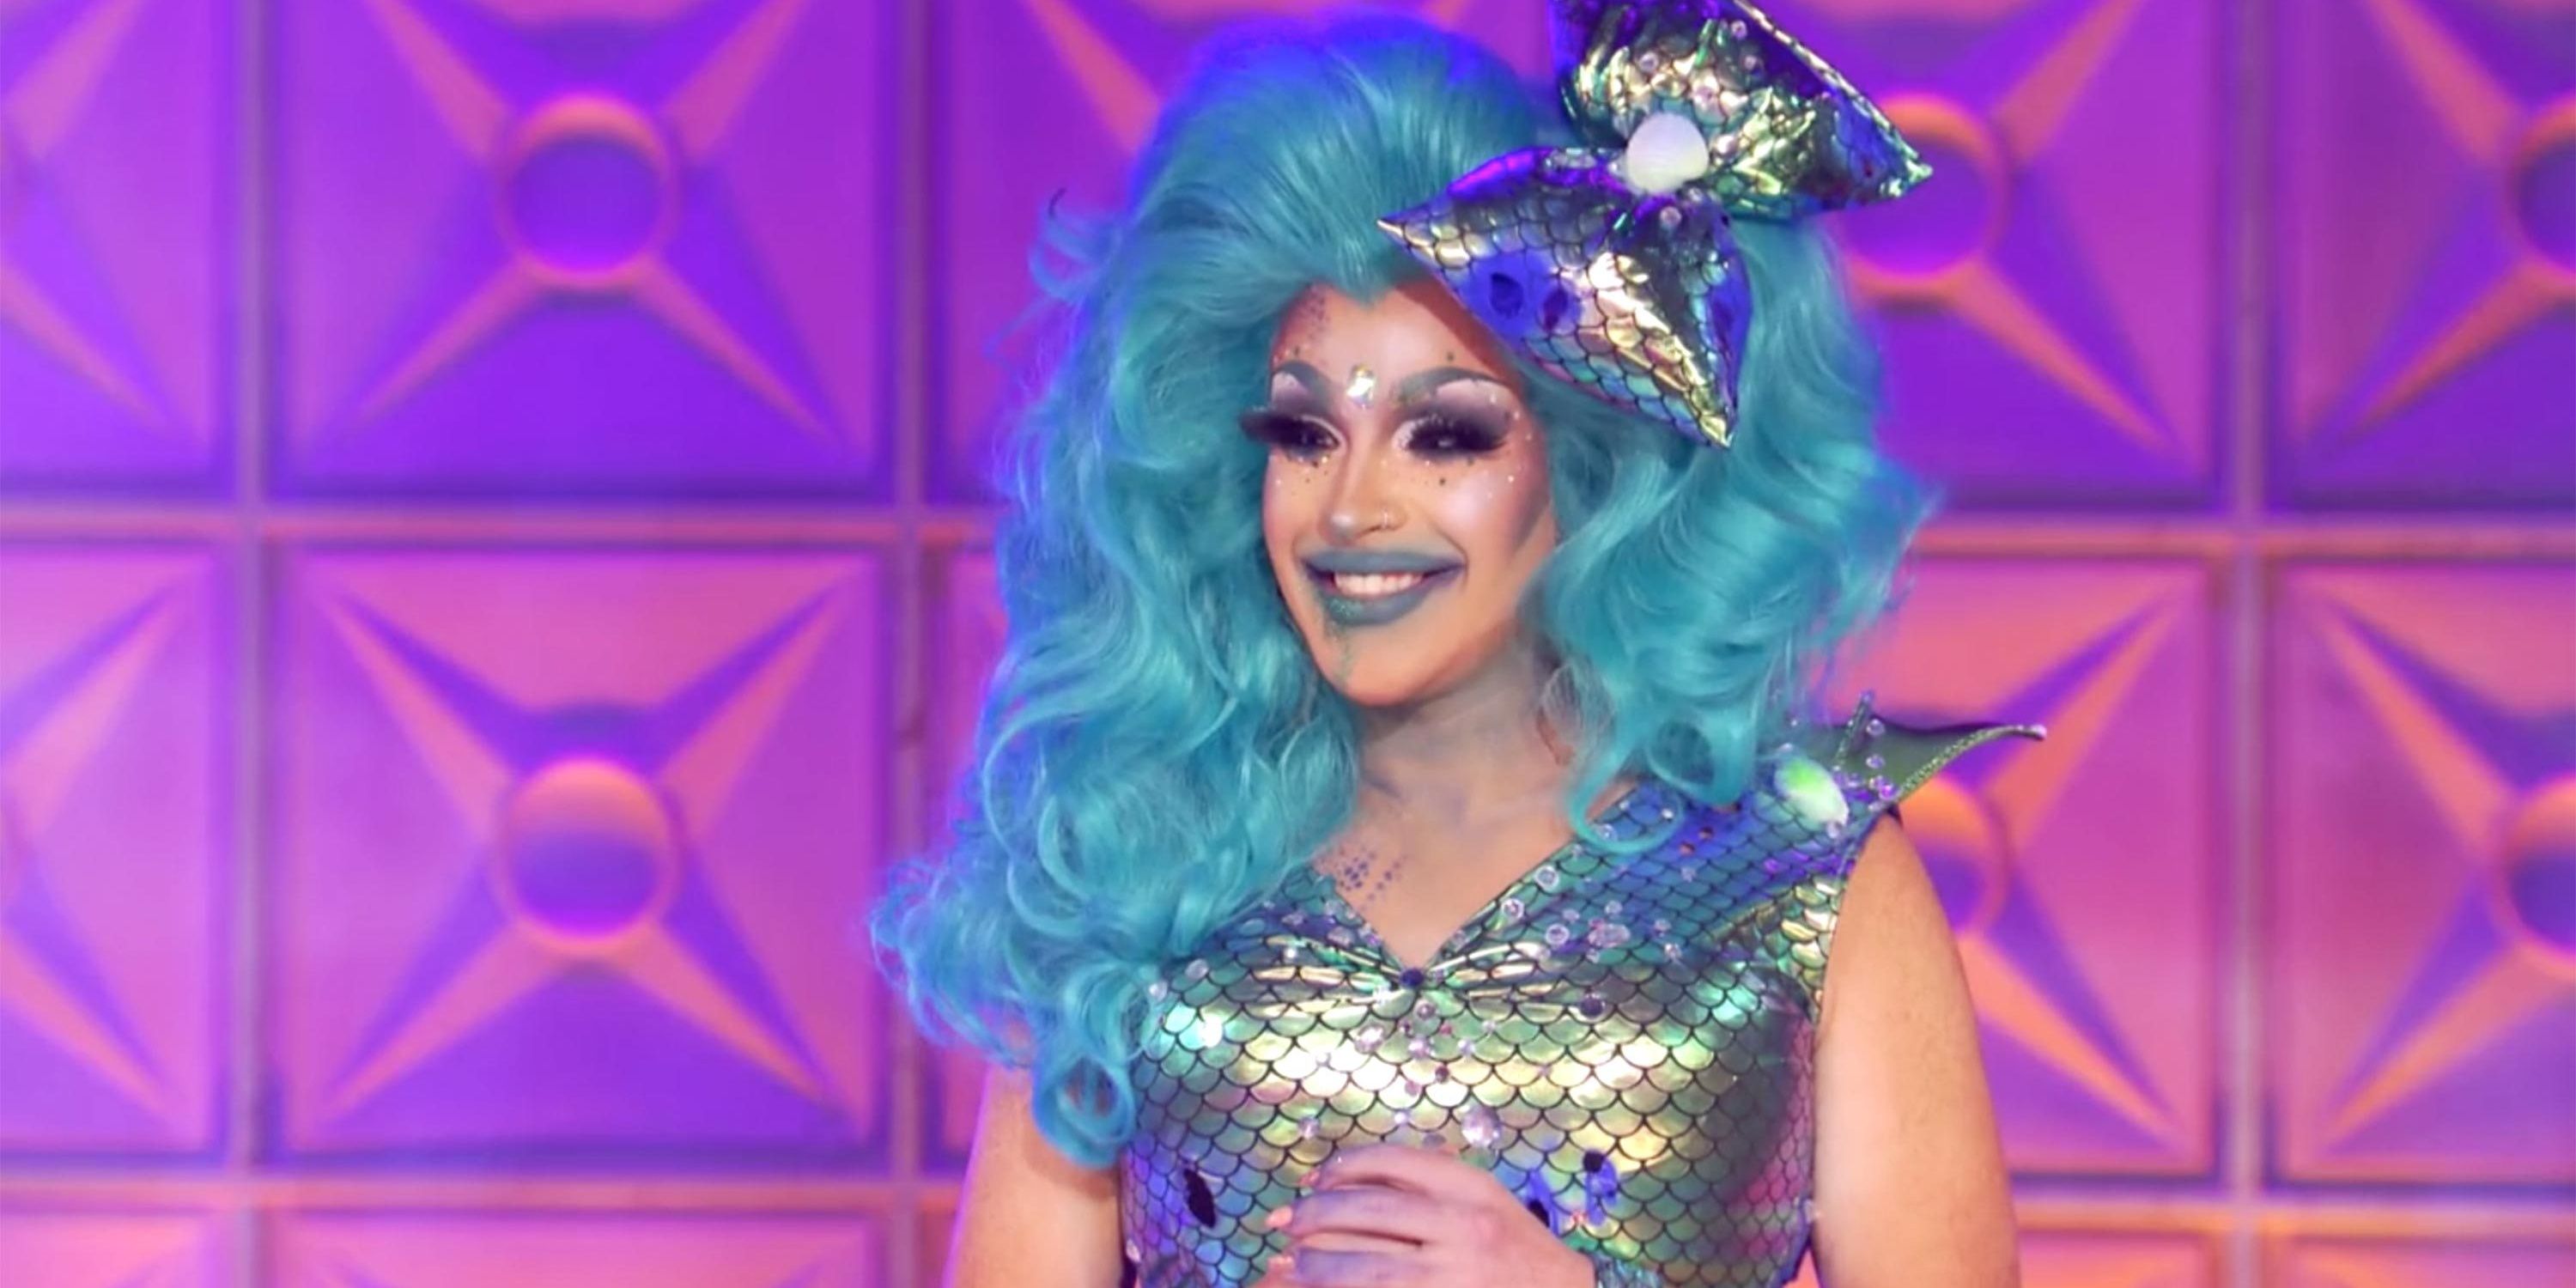 10 Storylines From RuPaul’s Drag Race That Never Got Resolved